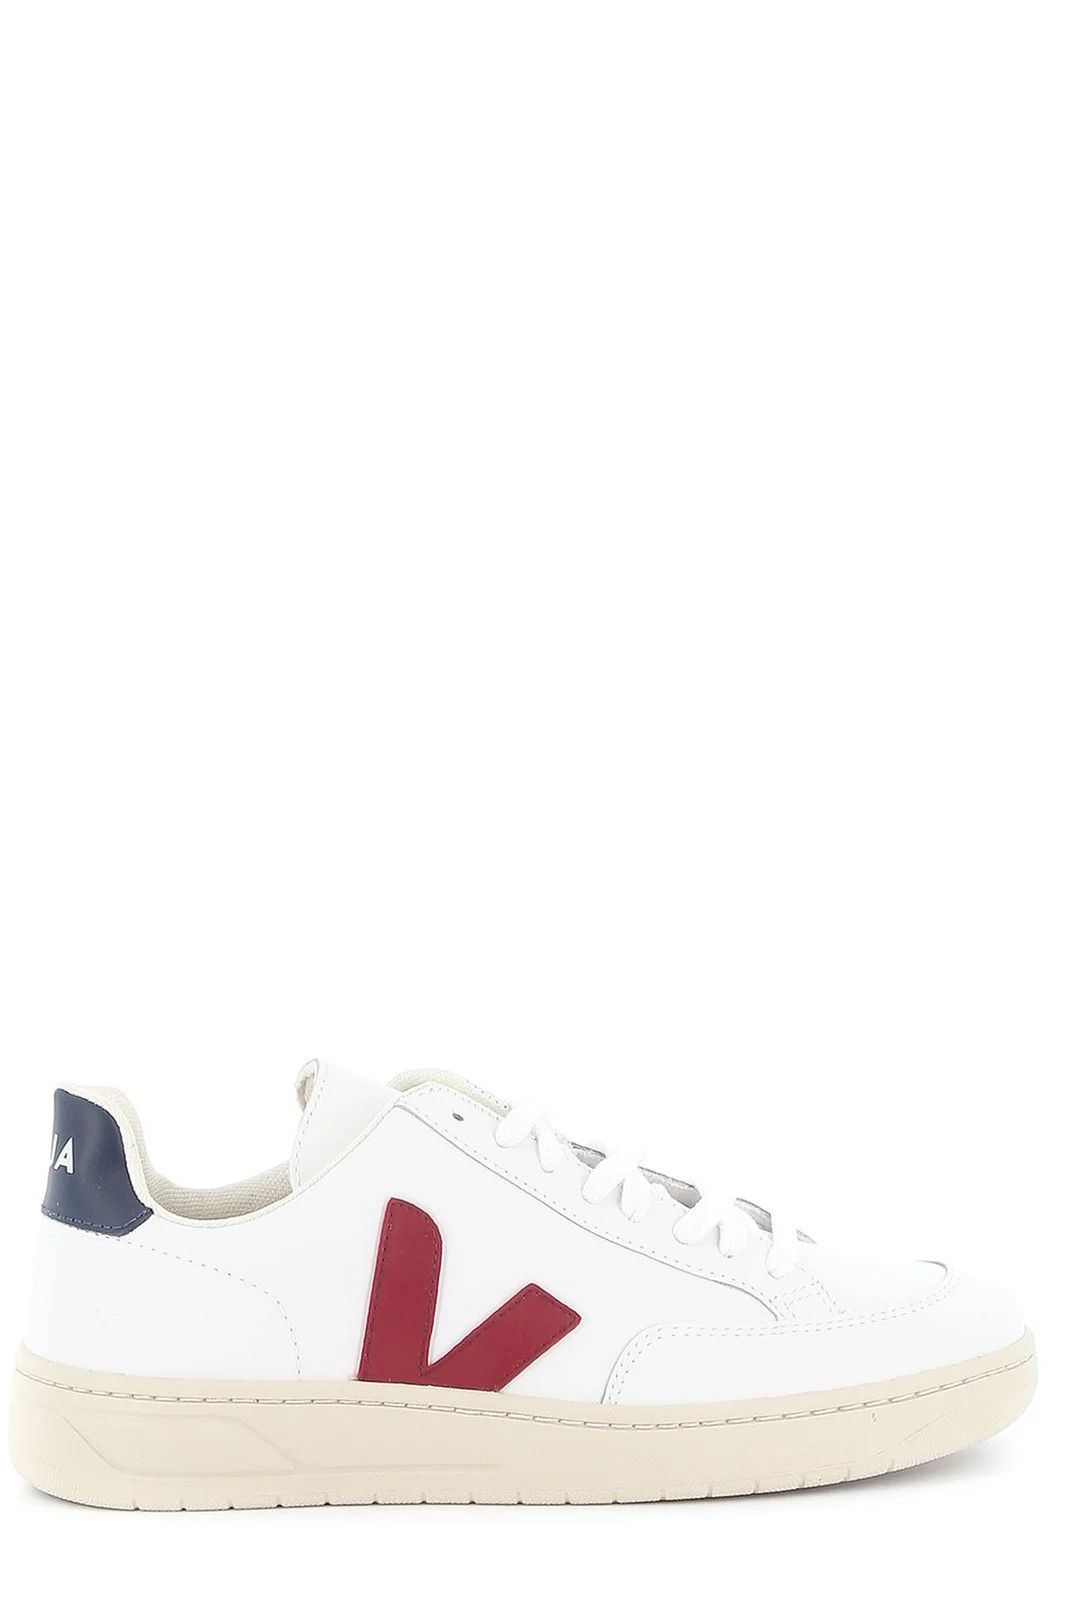 Veja V-12 Lace-Up Sneakers | Cettire Global